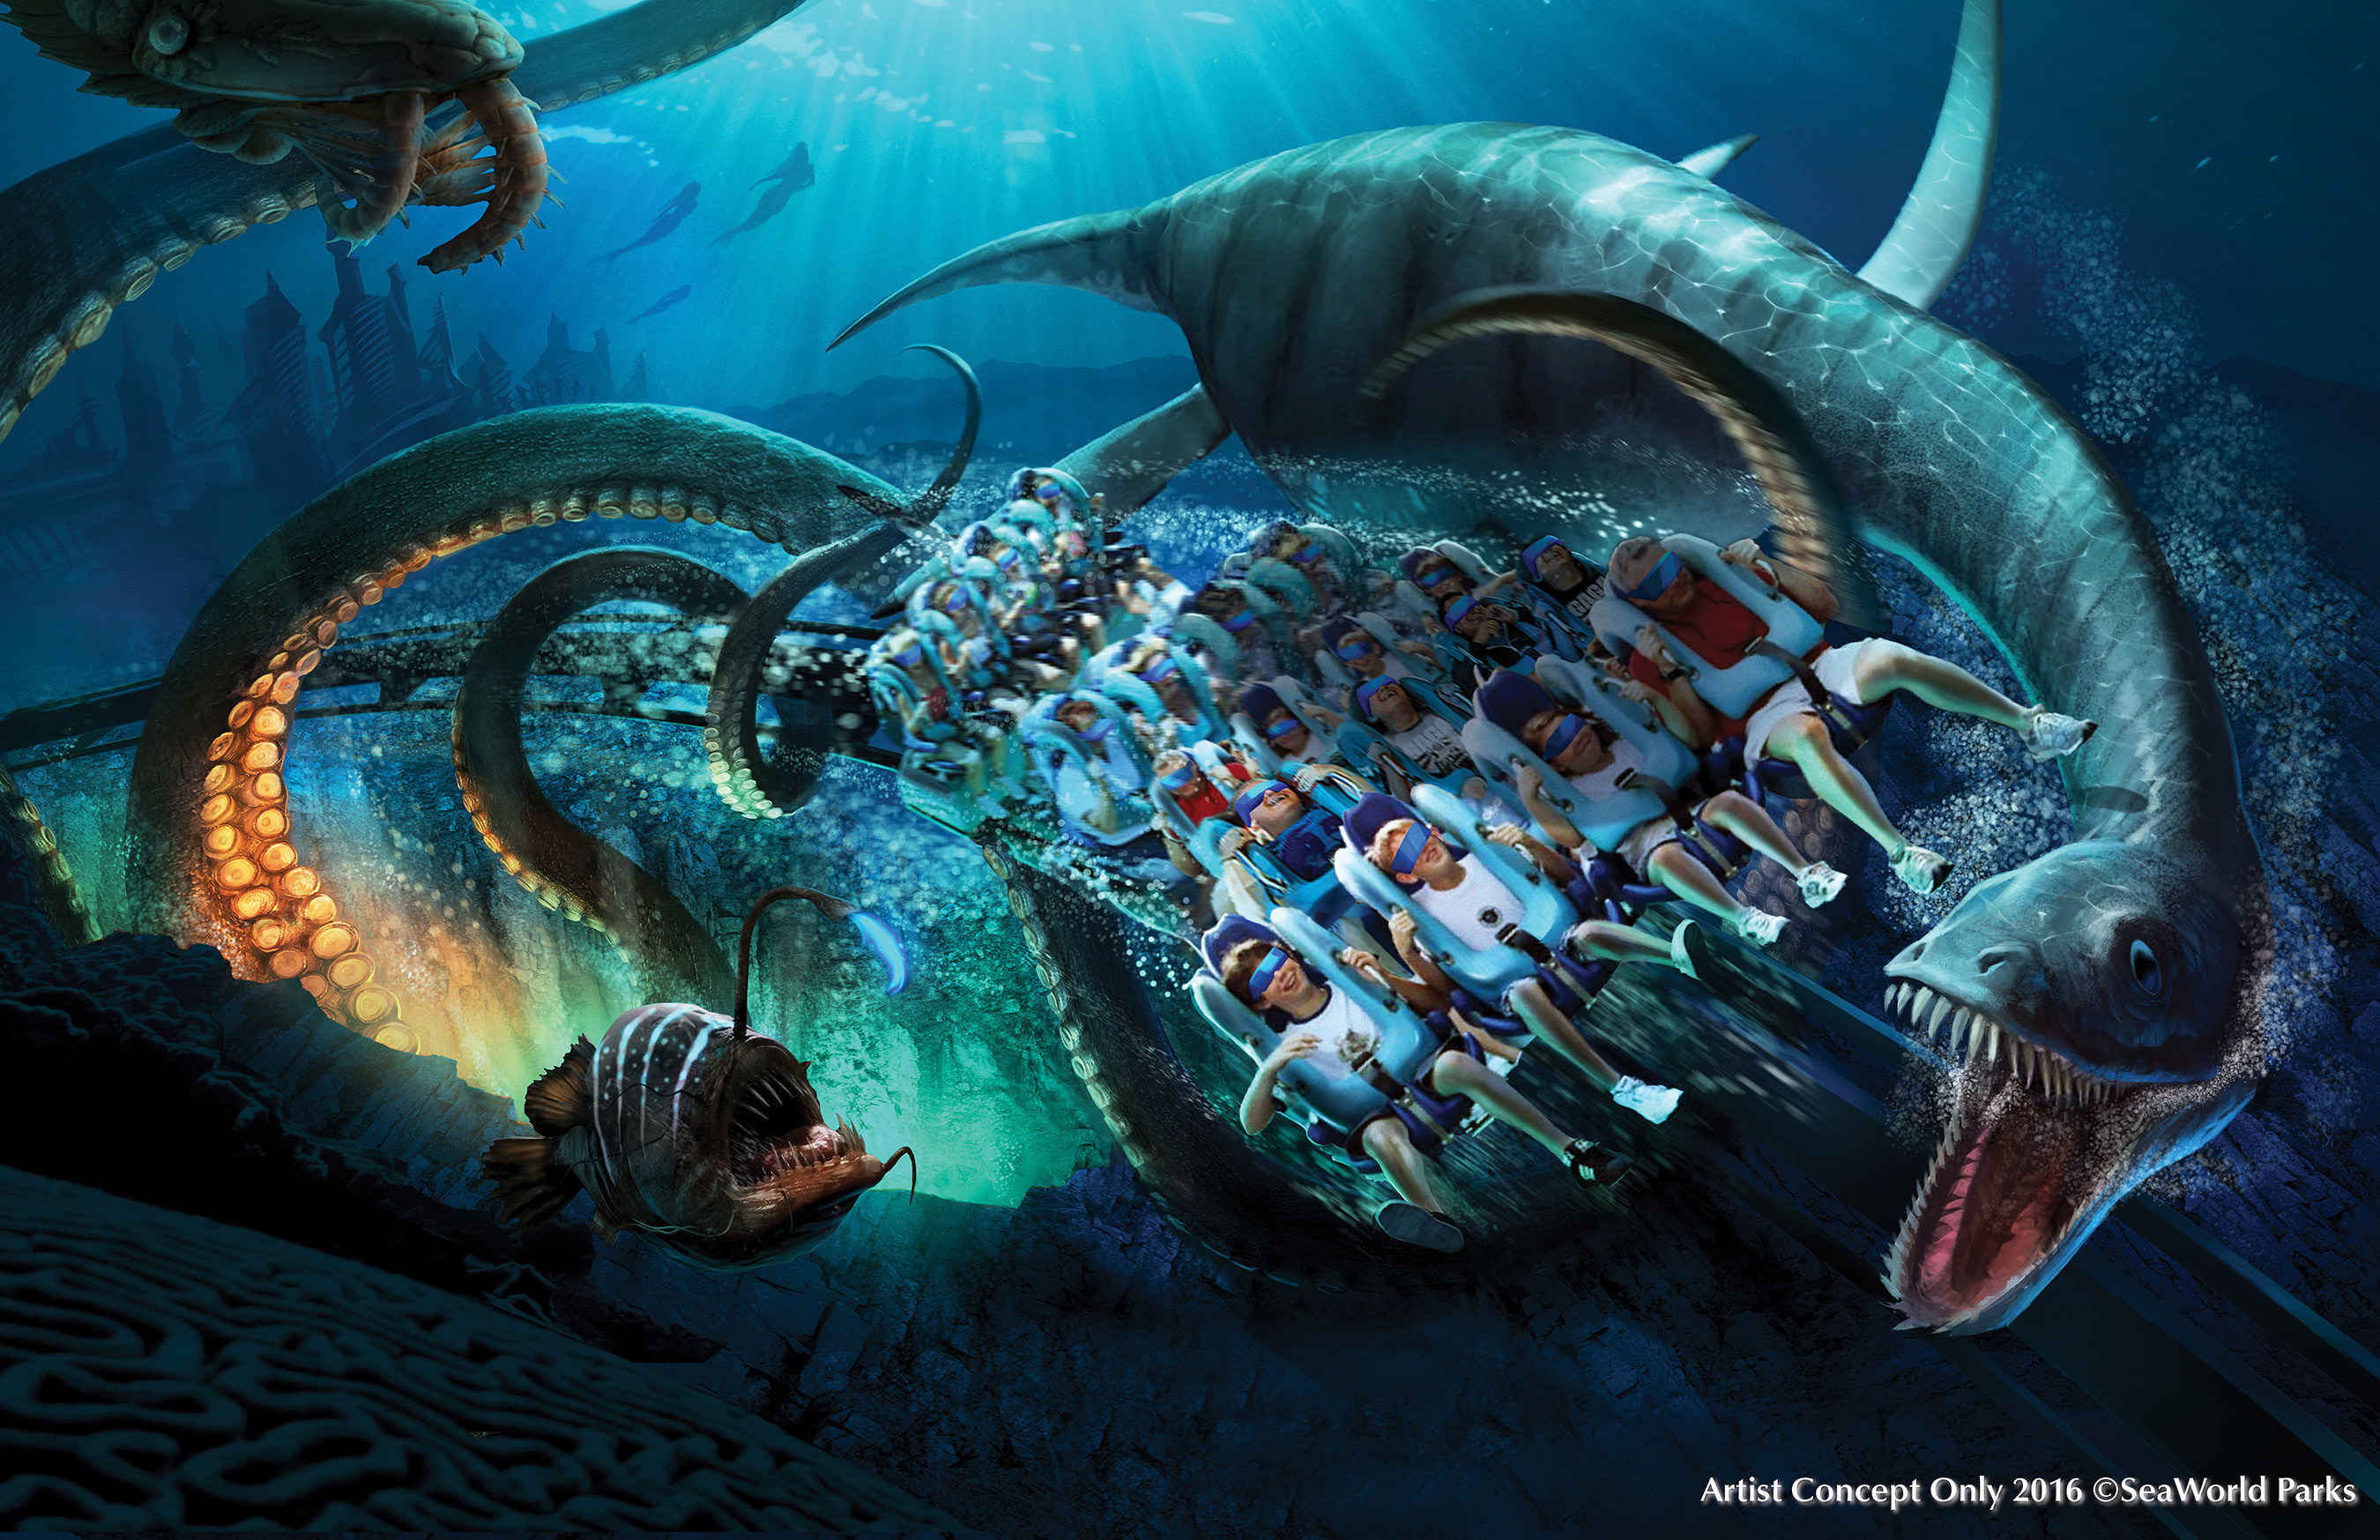 Kraken(R) Virtual Reality (VR) roller coaster, coming to SeaWorld Orlando 2017. The park's popular Kraken roller coaster will be transformed into a "deep sea" virtual reality coaster experience, the only VR coaster experience in Florida - taking riders on a mission alongside sea creatures inspired by extinct and legendary animals of the past.  A custom digital overlay with uniquely designed headsets, fully integrated both mechanically and electronically into the coaster train, delivers a new one-of-a-kind adventure.  Credit: Artist Concept Only - 2016 (C)SeaWorld Parks